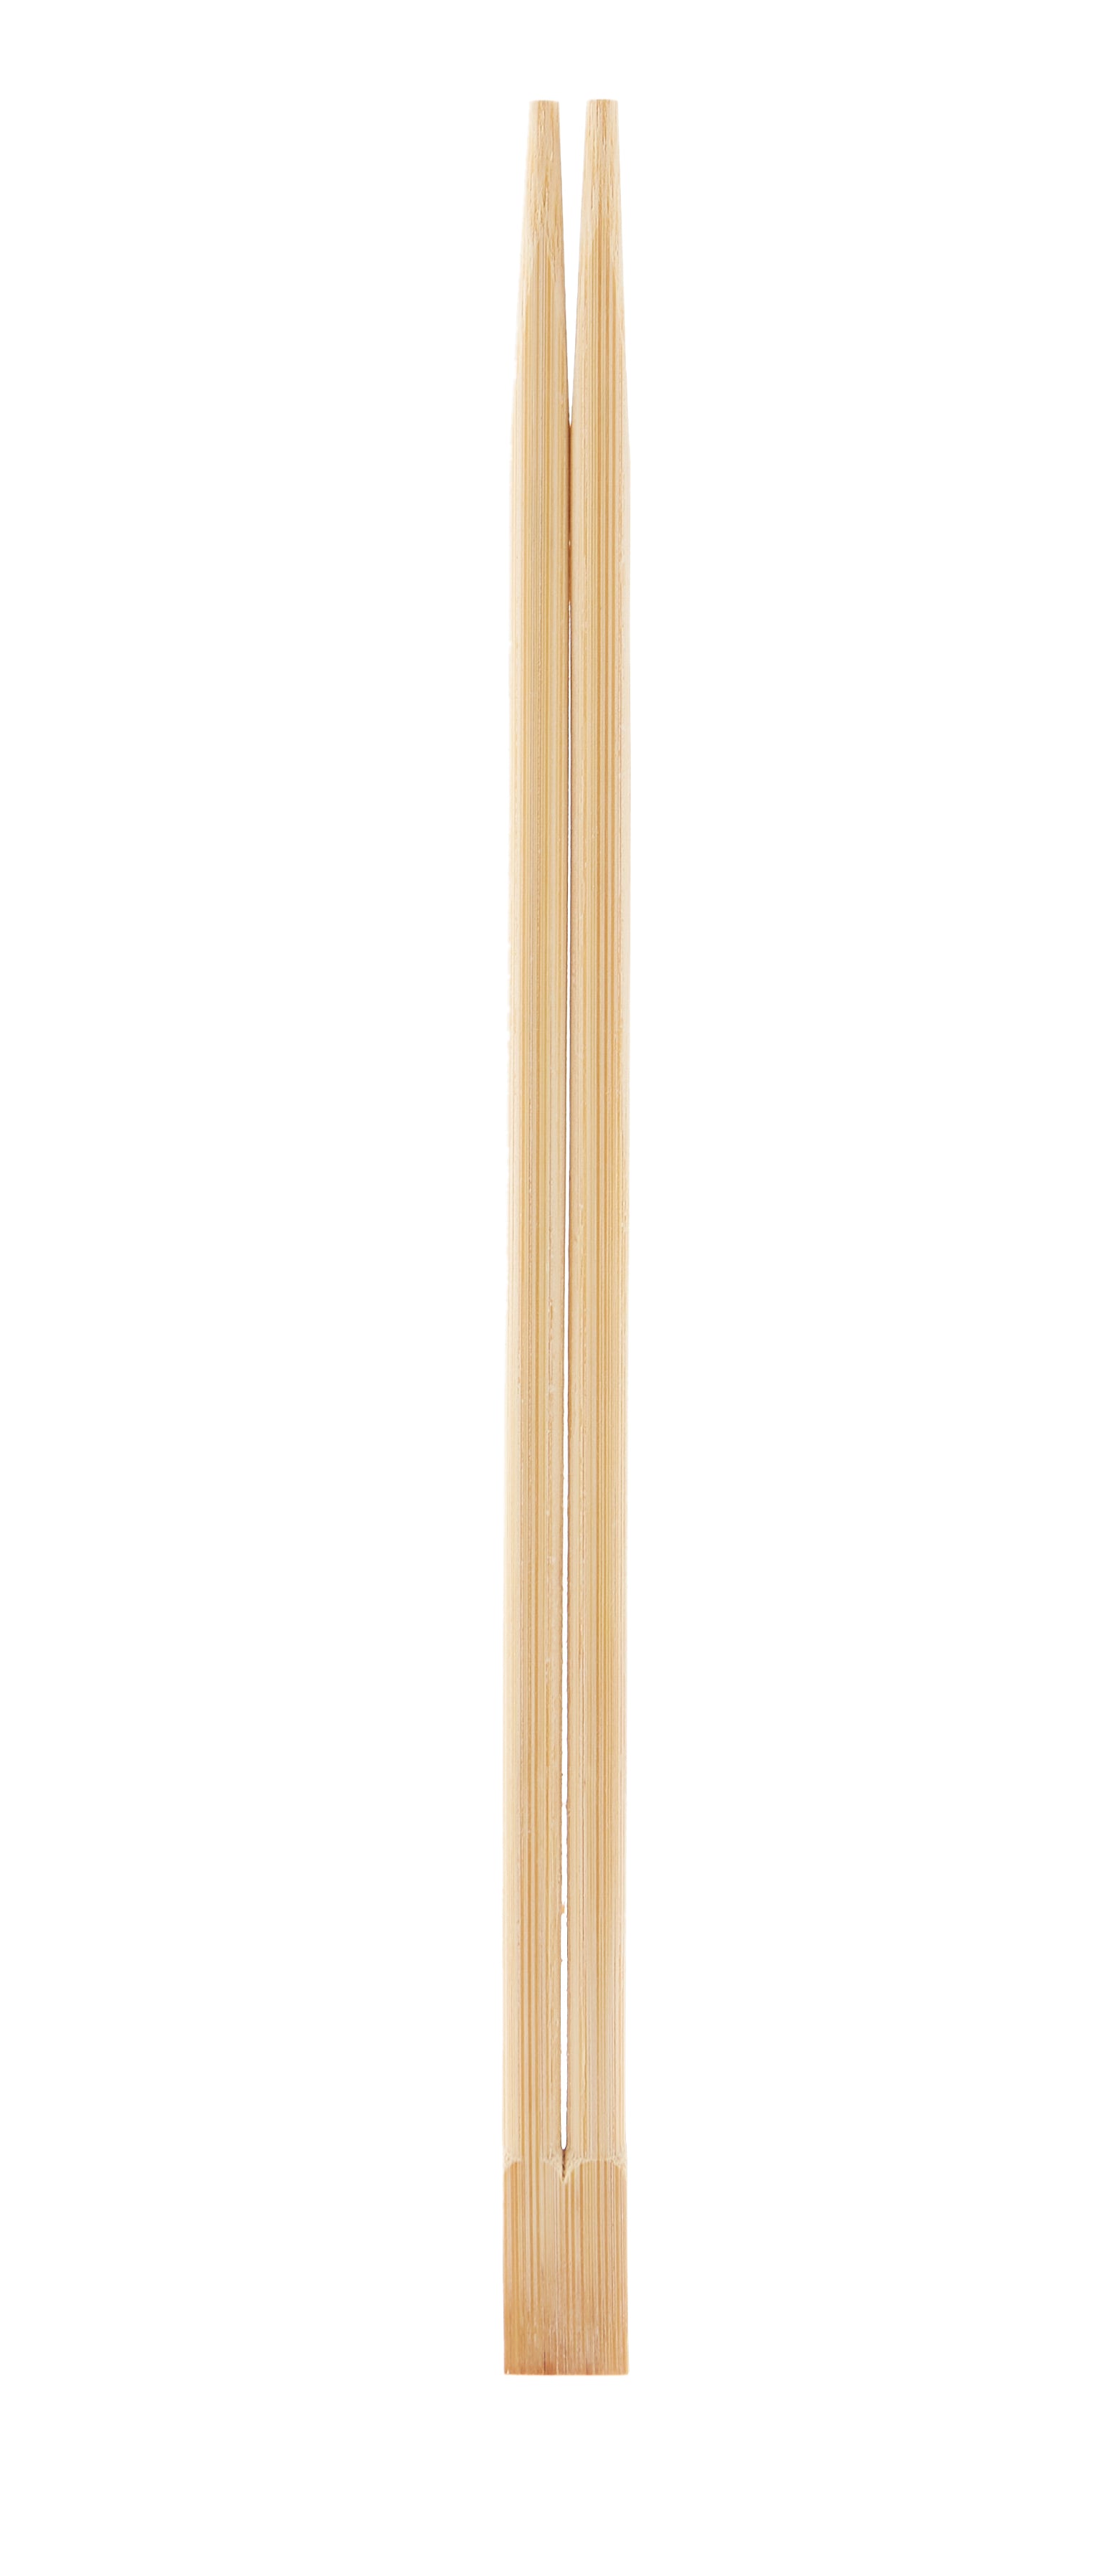 2000 Pieces Bamboo Chopstick, Wrapped - 23 cm